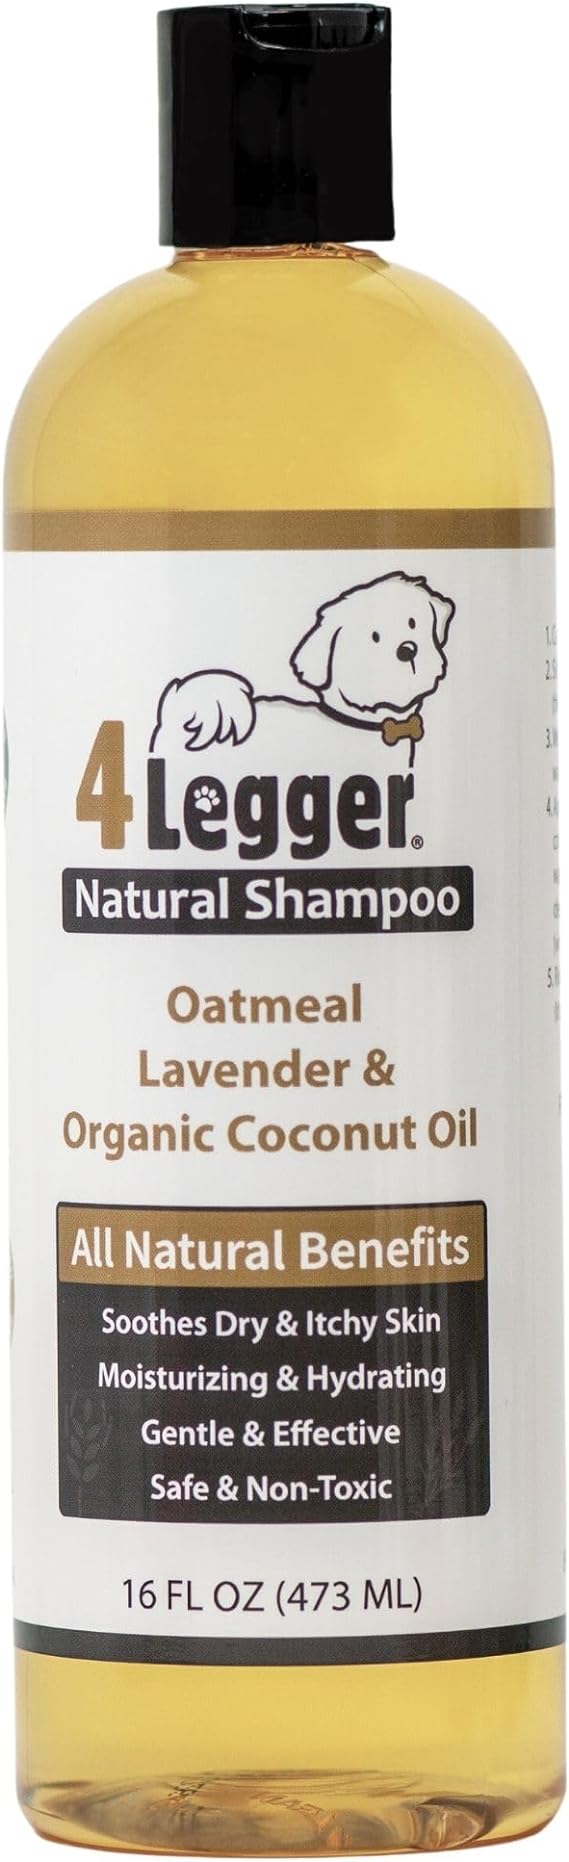 4-Legger Certified Organic Oatmeal Dog Shampoo with Aloe and Lavender Essential Oil - All Natural Safely Soothe, Condition and Moisturize Normal to Dry, Itchy Sensitive Skin - Made in USA - 16 oz